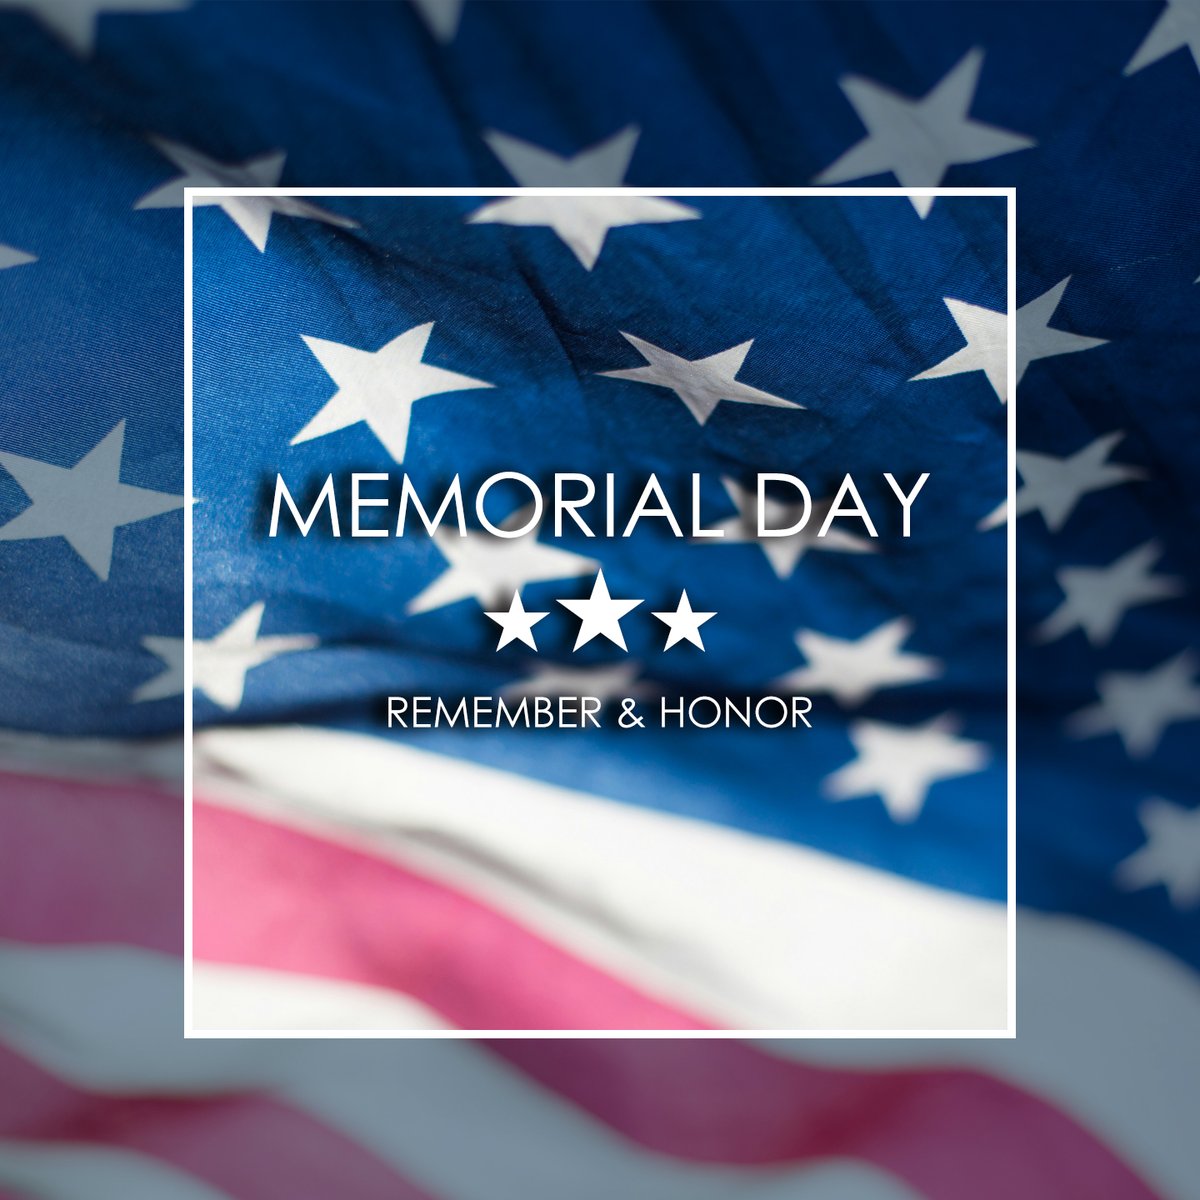 This #MemorialDay, we remember and honor those who made the ultimate sacrifice in service to our country. Without their actions and bravery, freedom would not be ours.